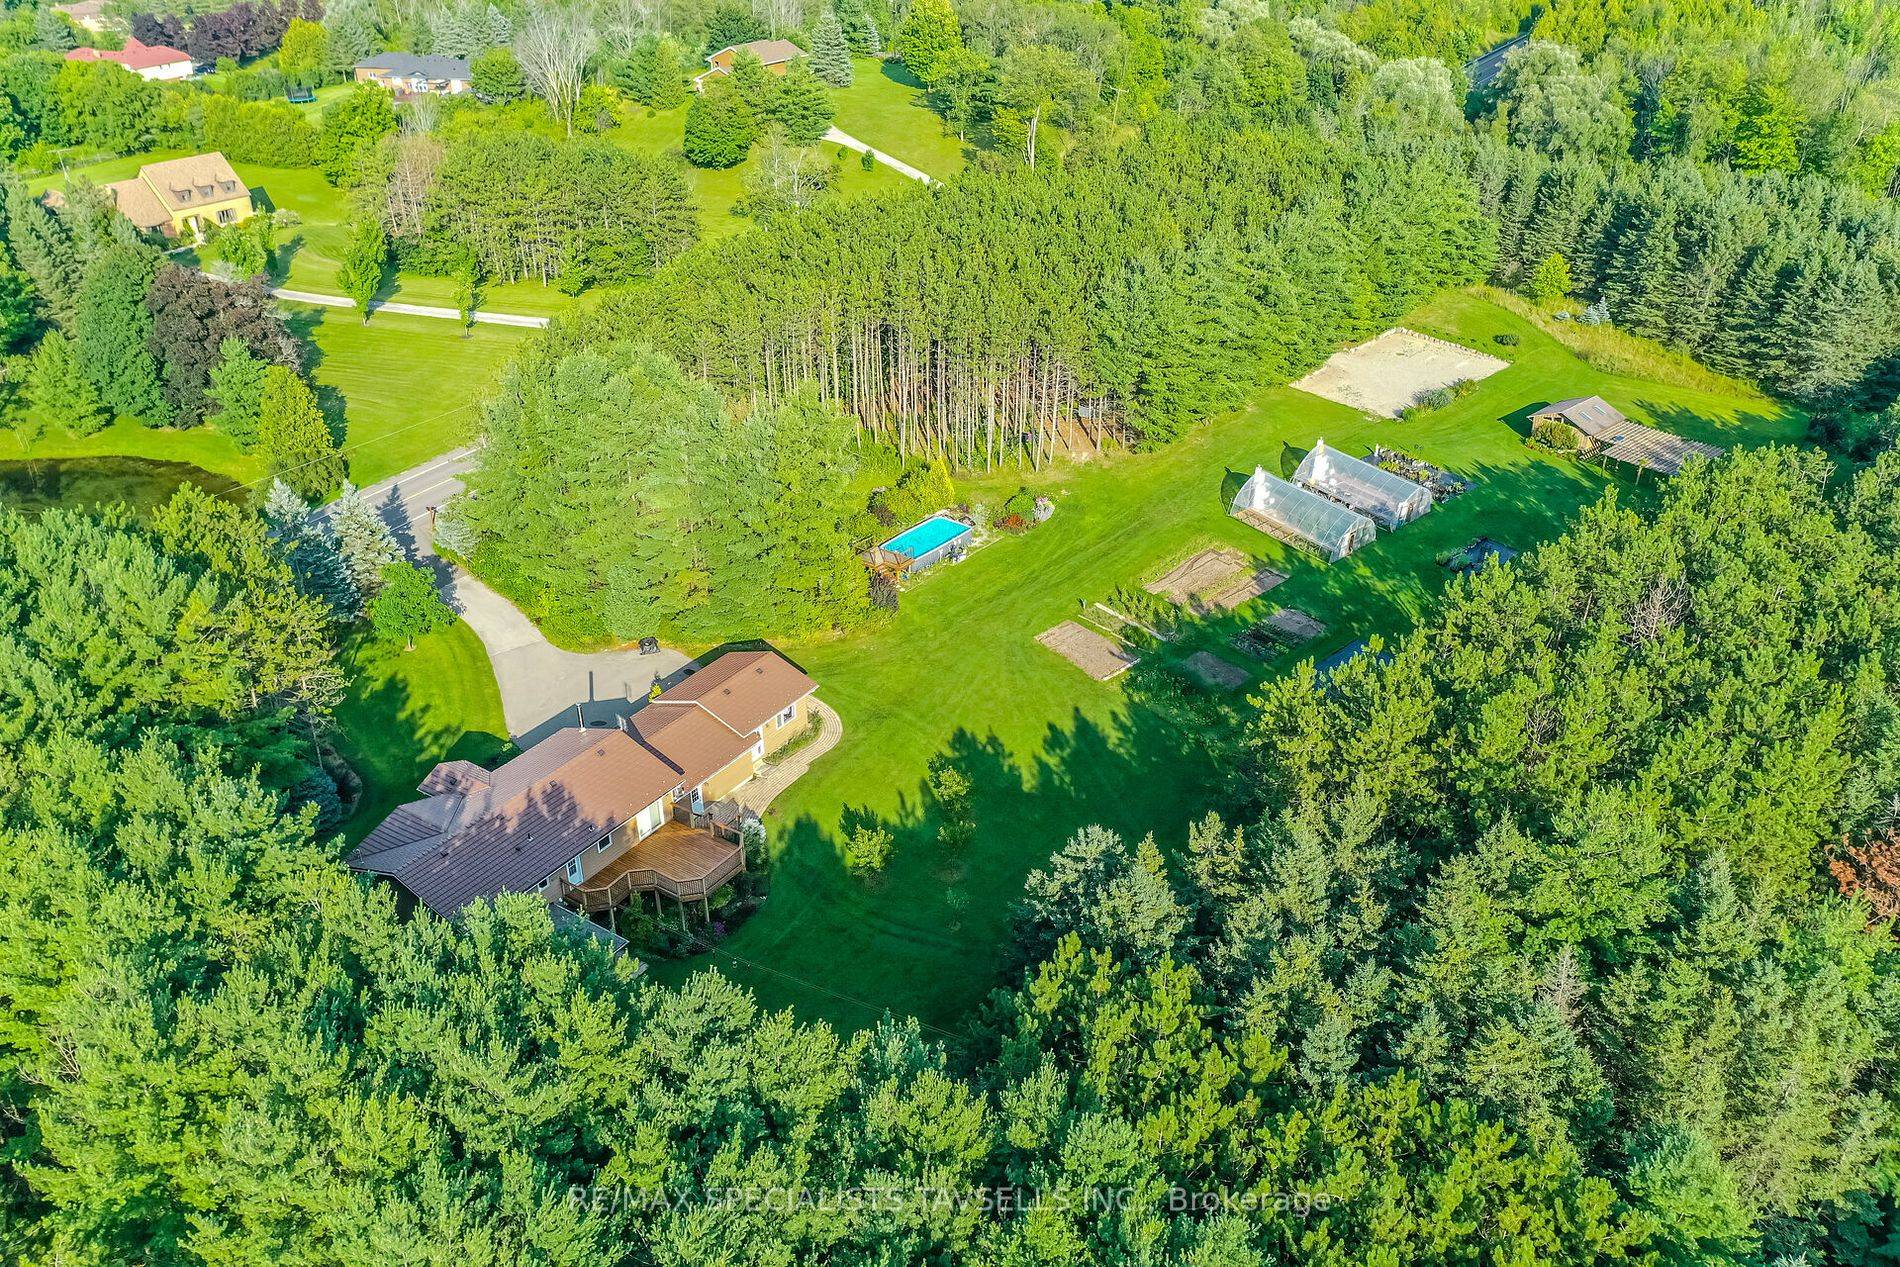 The award winning Plant Paradise is a one of a kind picturesque property set on immaculately kept 24 Acres backing onto Centreville Creek, with 844 ft frontage and breath taking ...